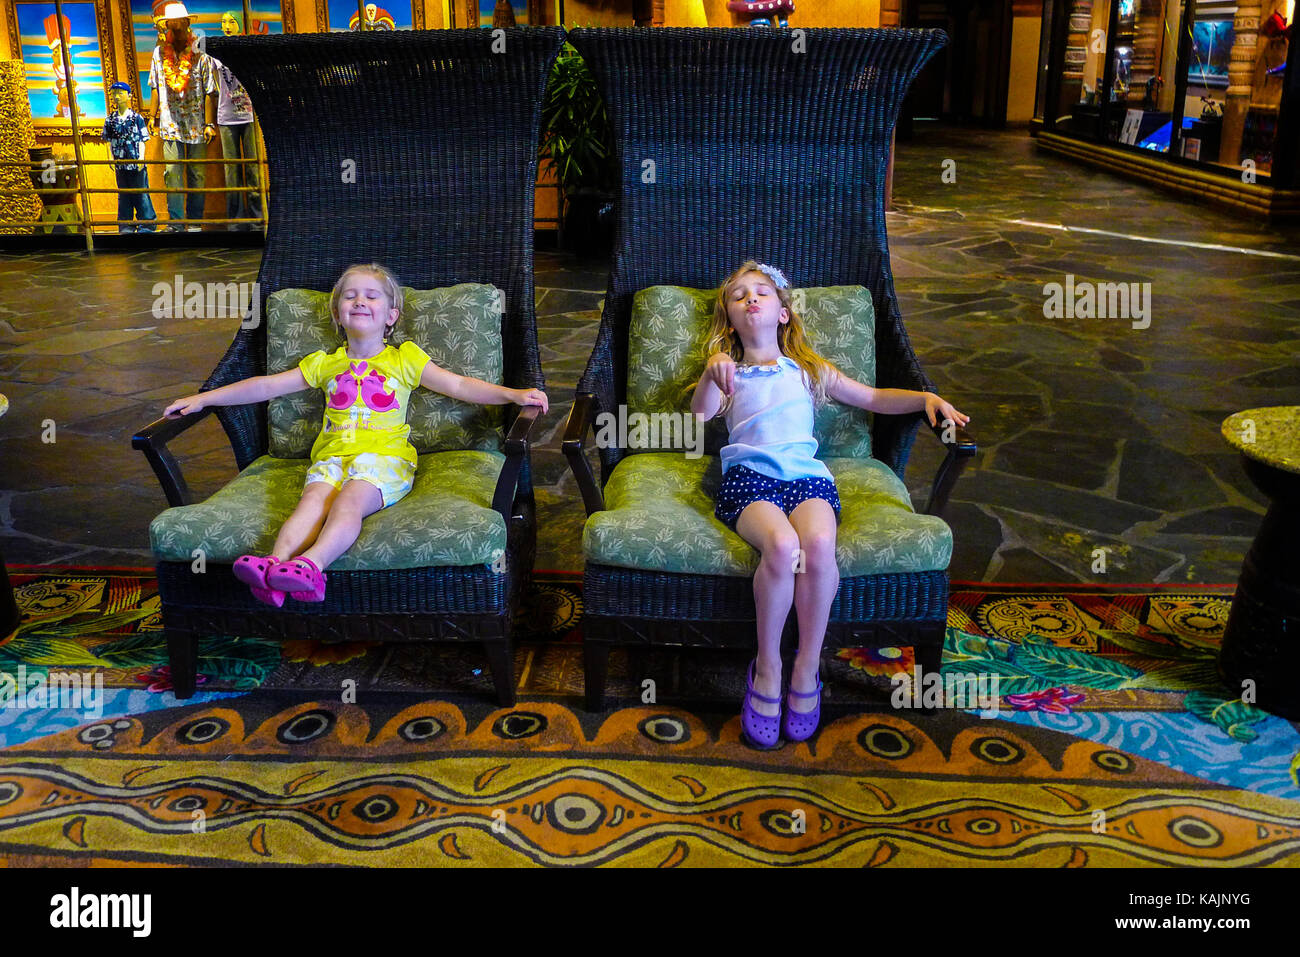 Children messing around in two giant chairs, disney world Stock Photo